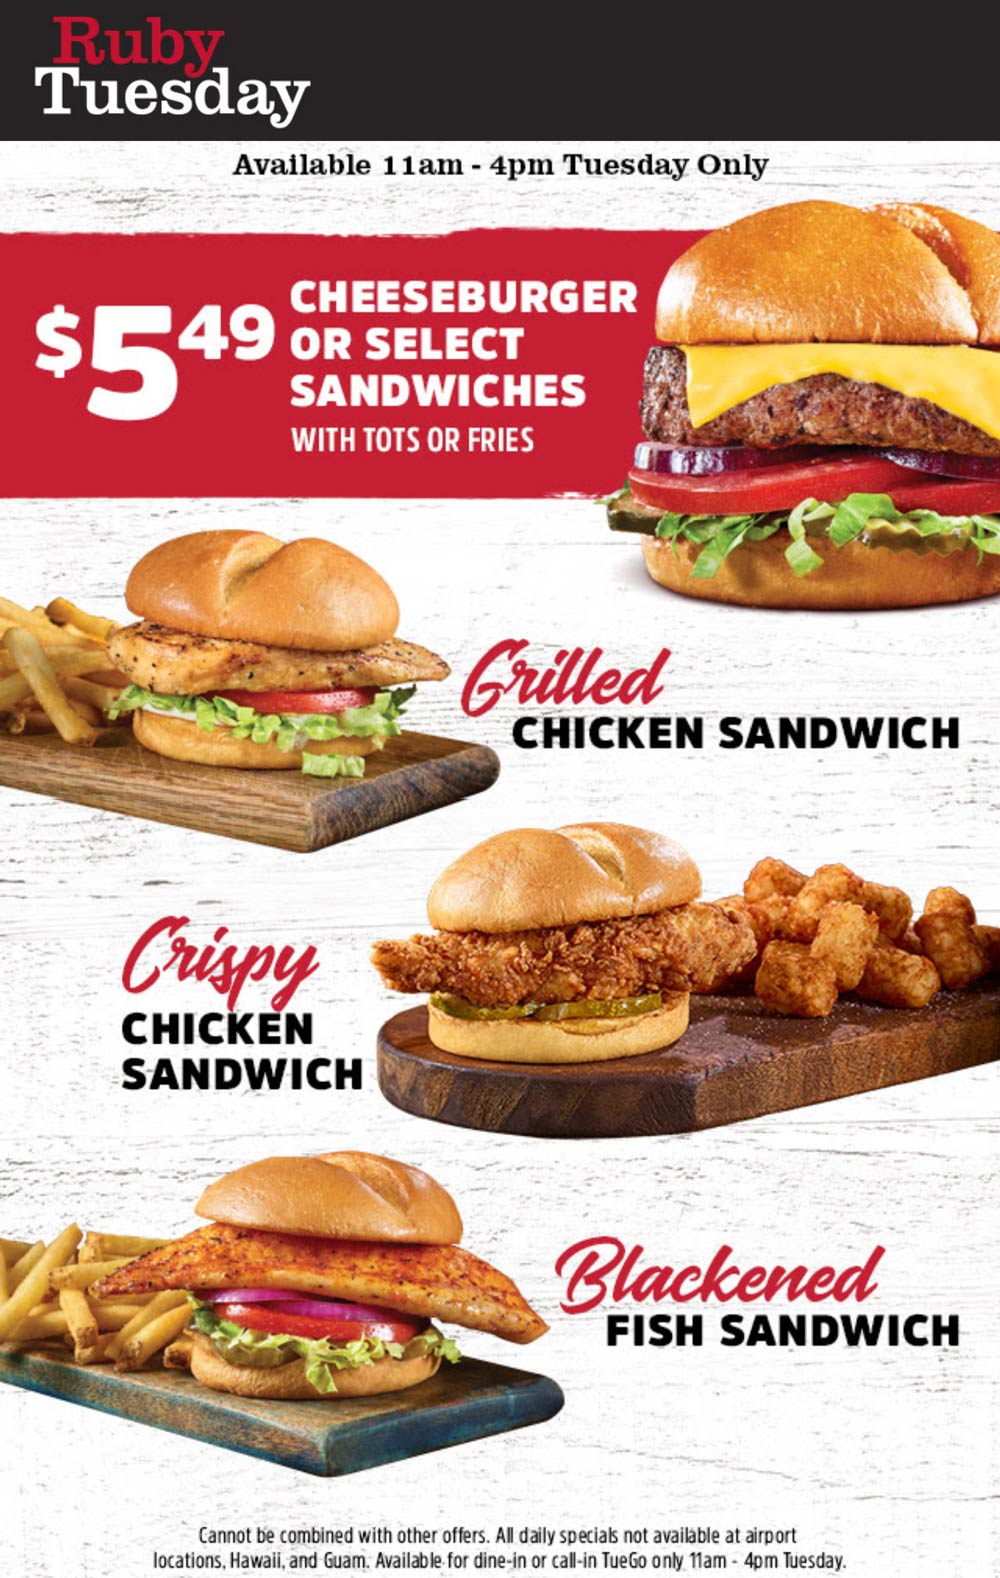 Ruby Tuesday restaurants Coupon  Fish, chicken or cheeseburger + fries = $5.49 today at Ruby Tuesday #rubytuesday 